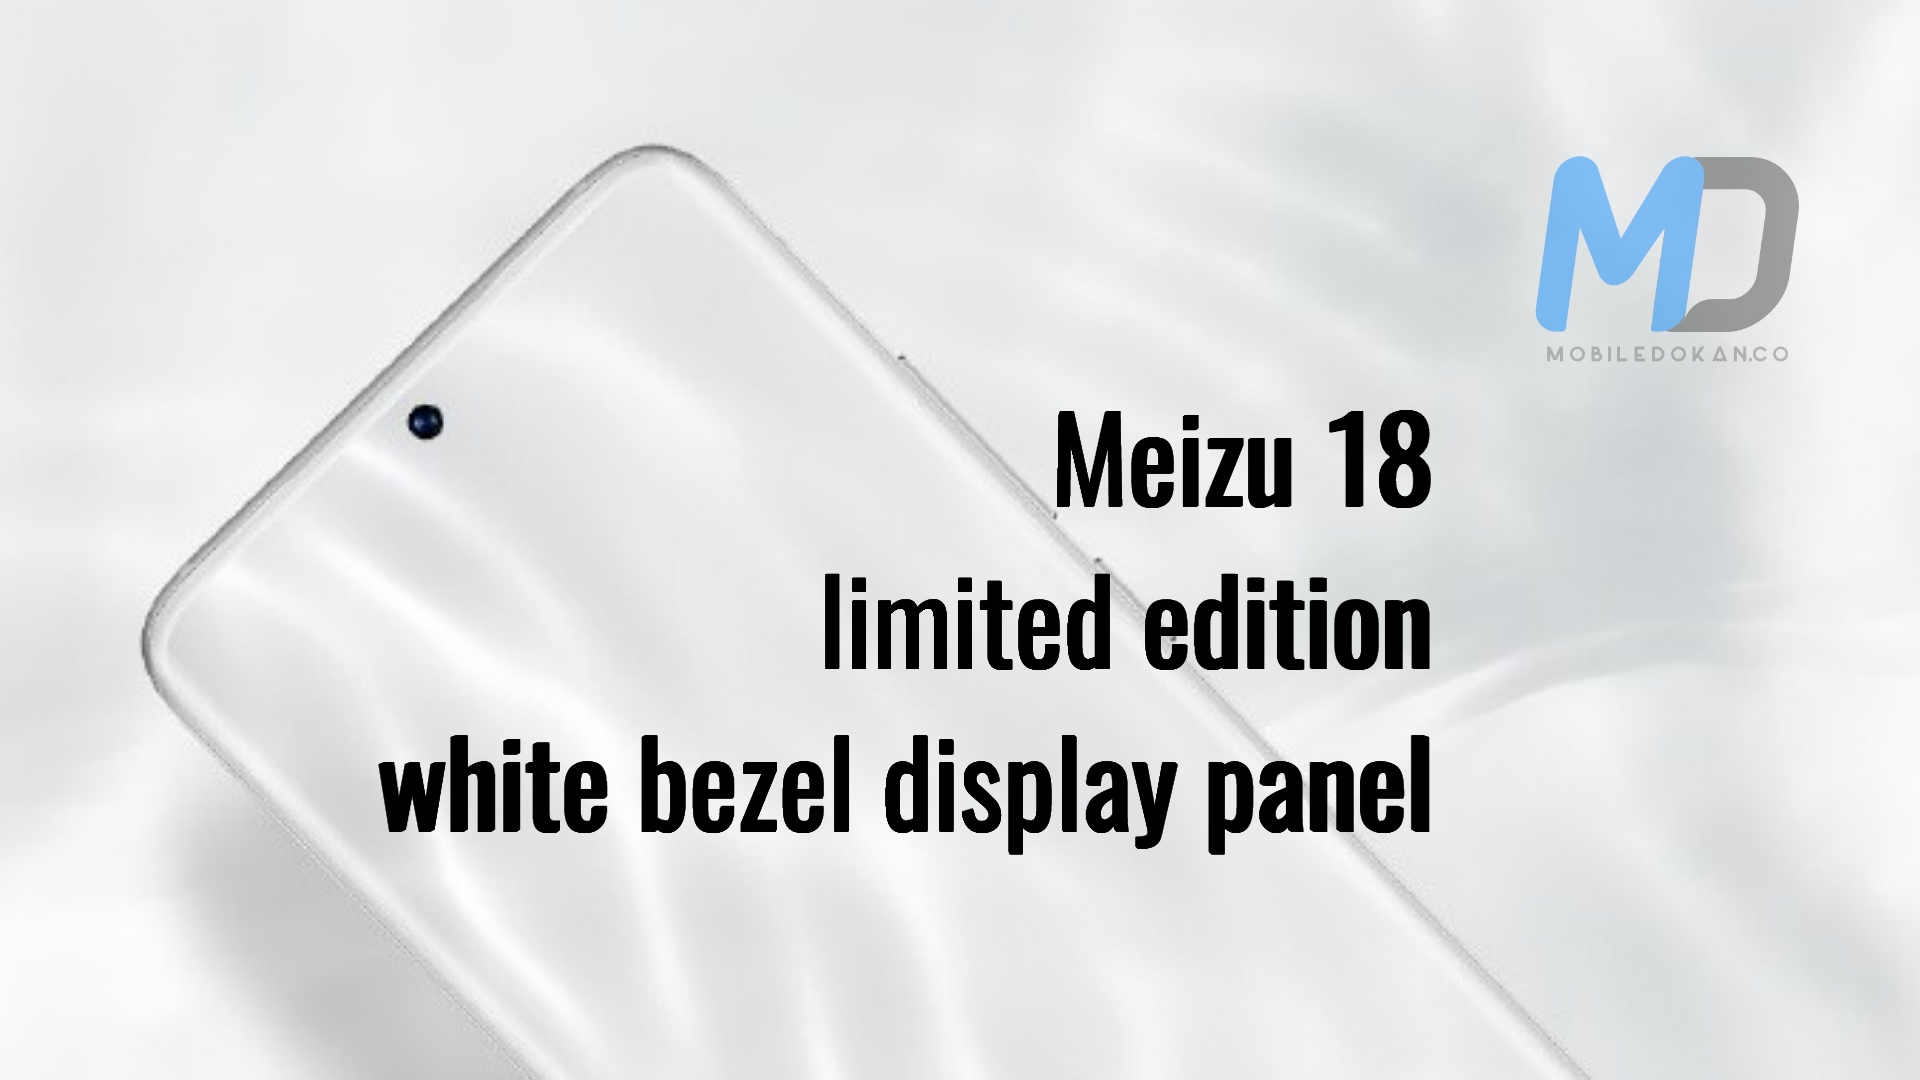 Meizu 18 comes with a limited edition white bezel display panel